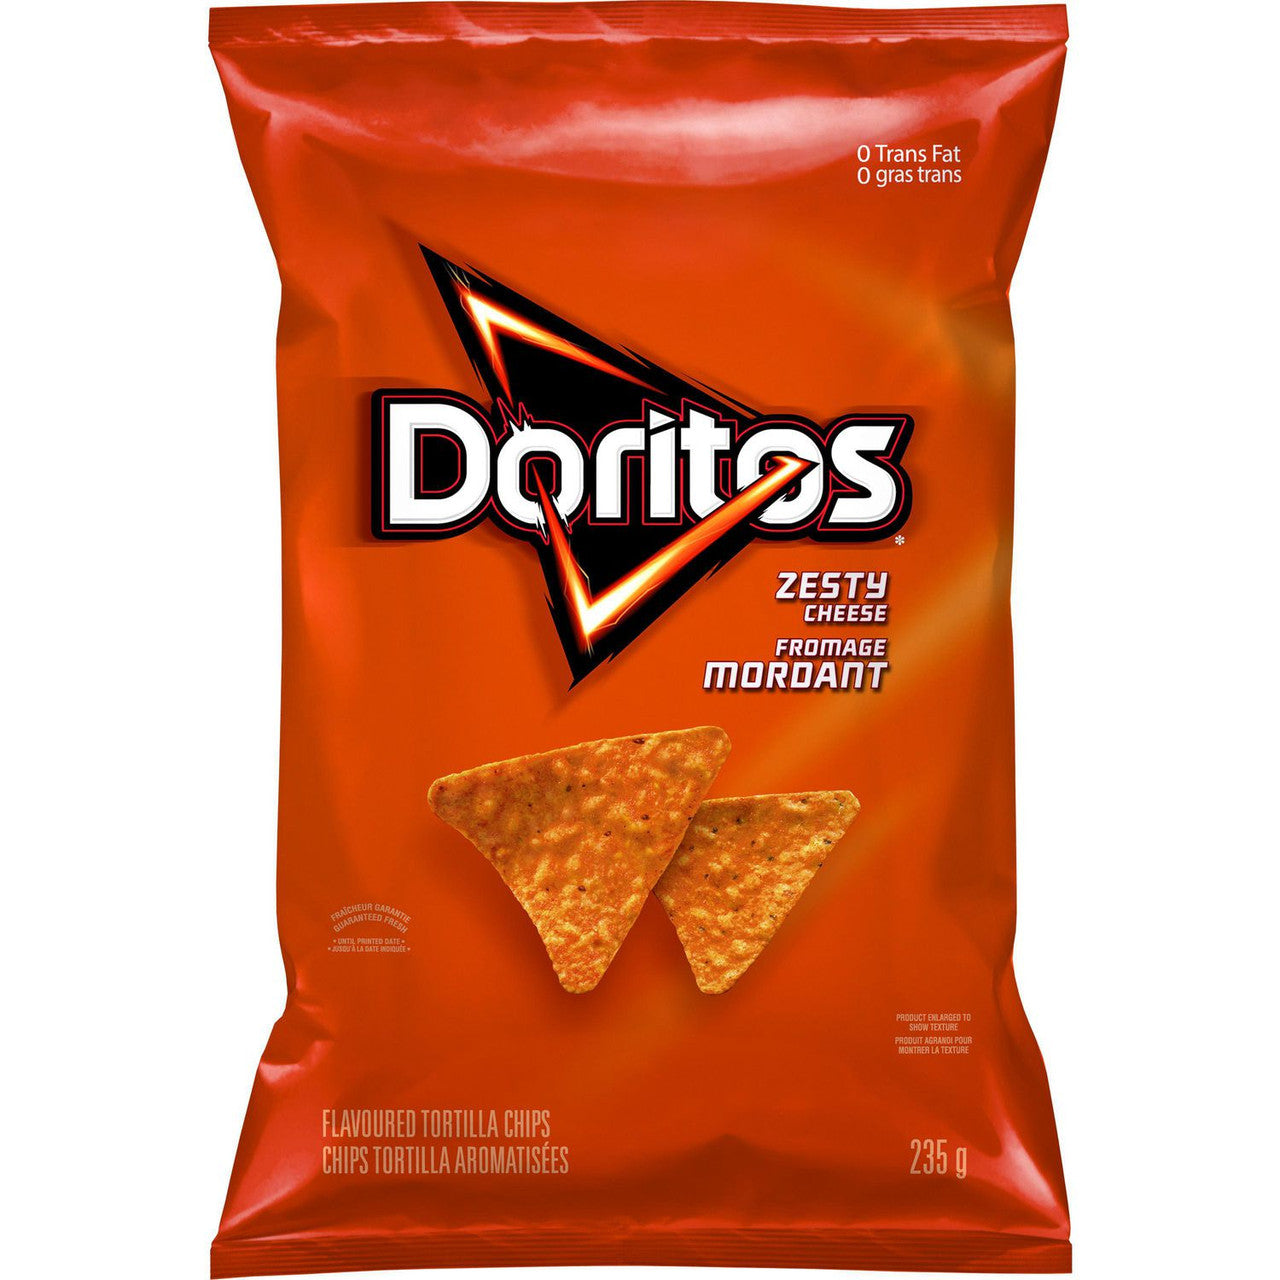 Doritos Zesty Cheese Tortilla Chips, 235g/8.3 oz., Bag, {Imported from Canada}